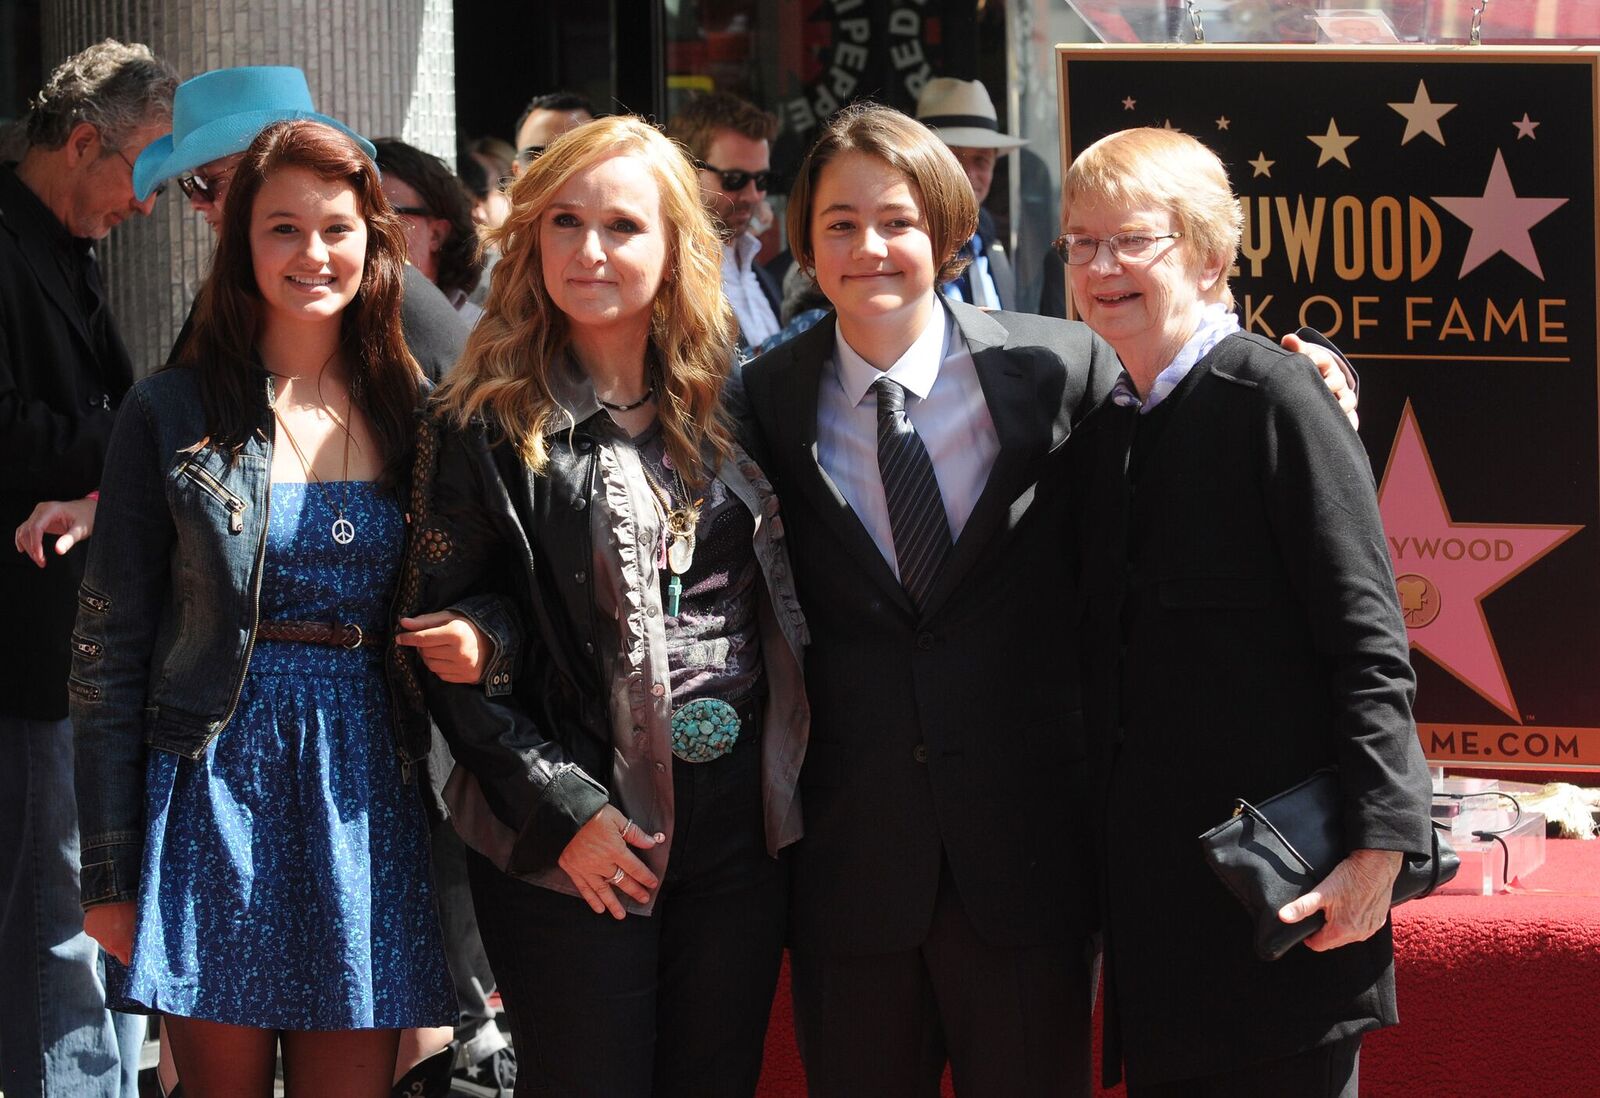 Bailey Cypher, Melissa Etheridge, Beckett Cypher, and Elizabeth Williamson at Etheridge's Hollywood Walk of Fame Induction Ceremony on September 27, 2011 | Photo: Getty Images